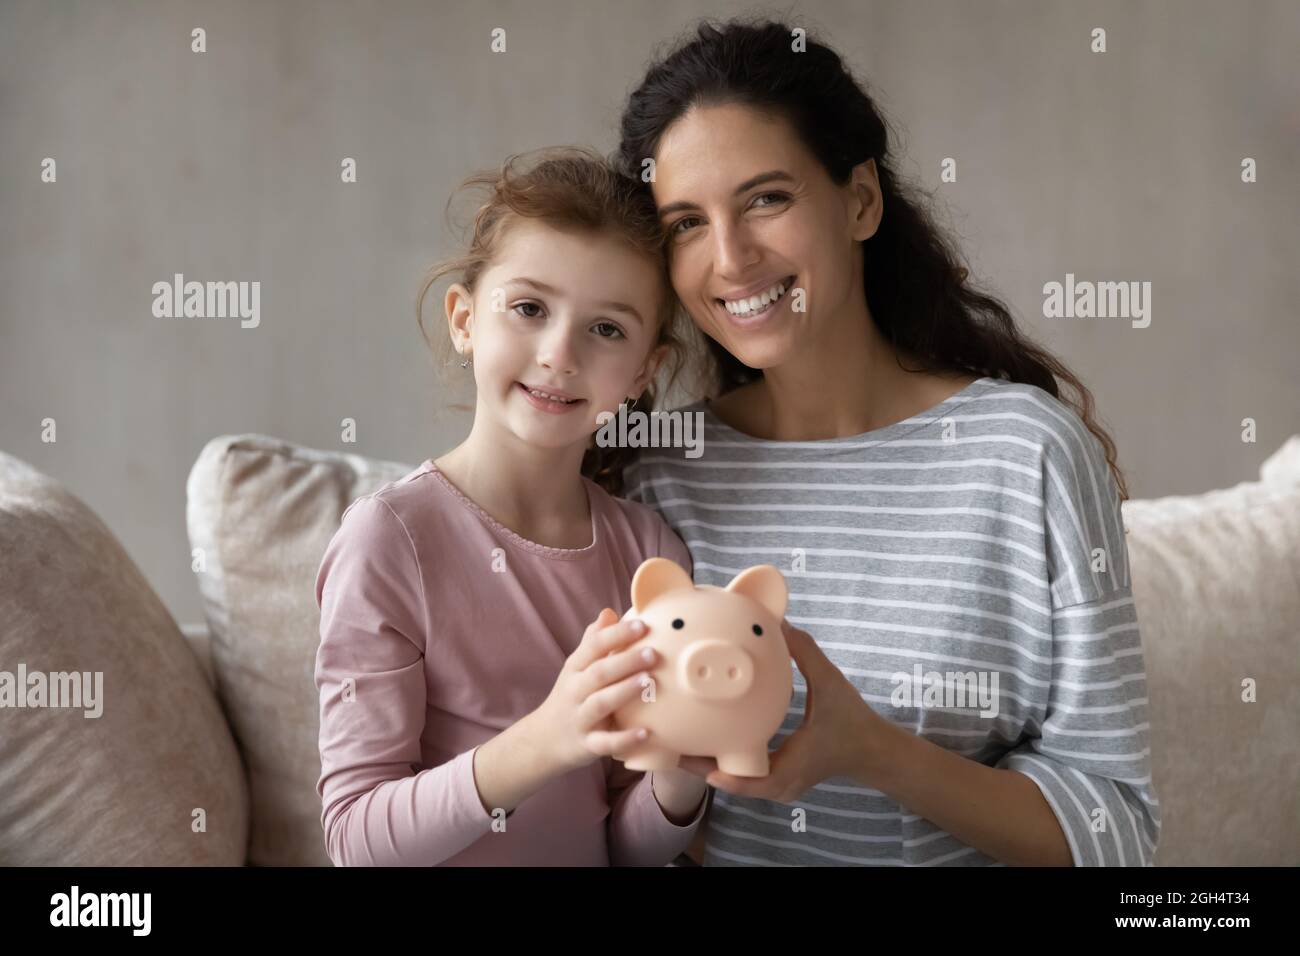 Smiling young mother and little child holding piggybank. Stock Photo